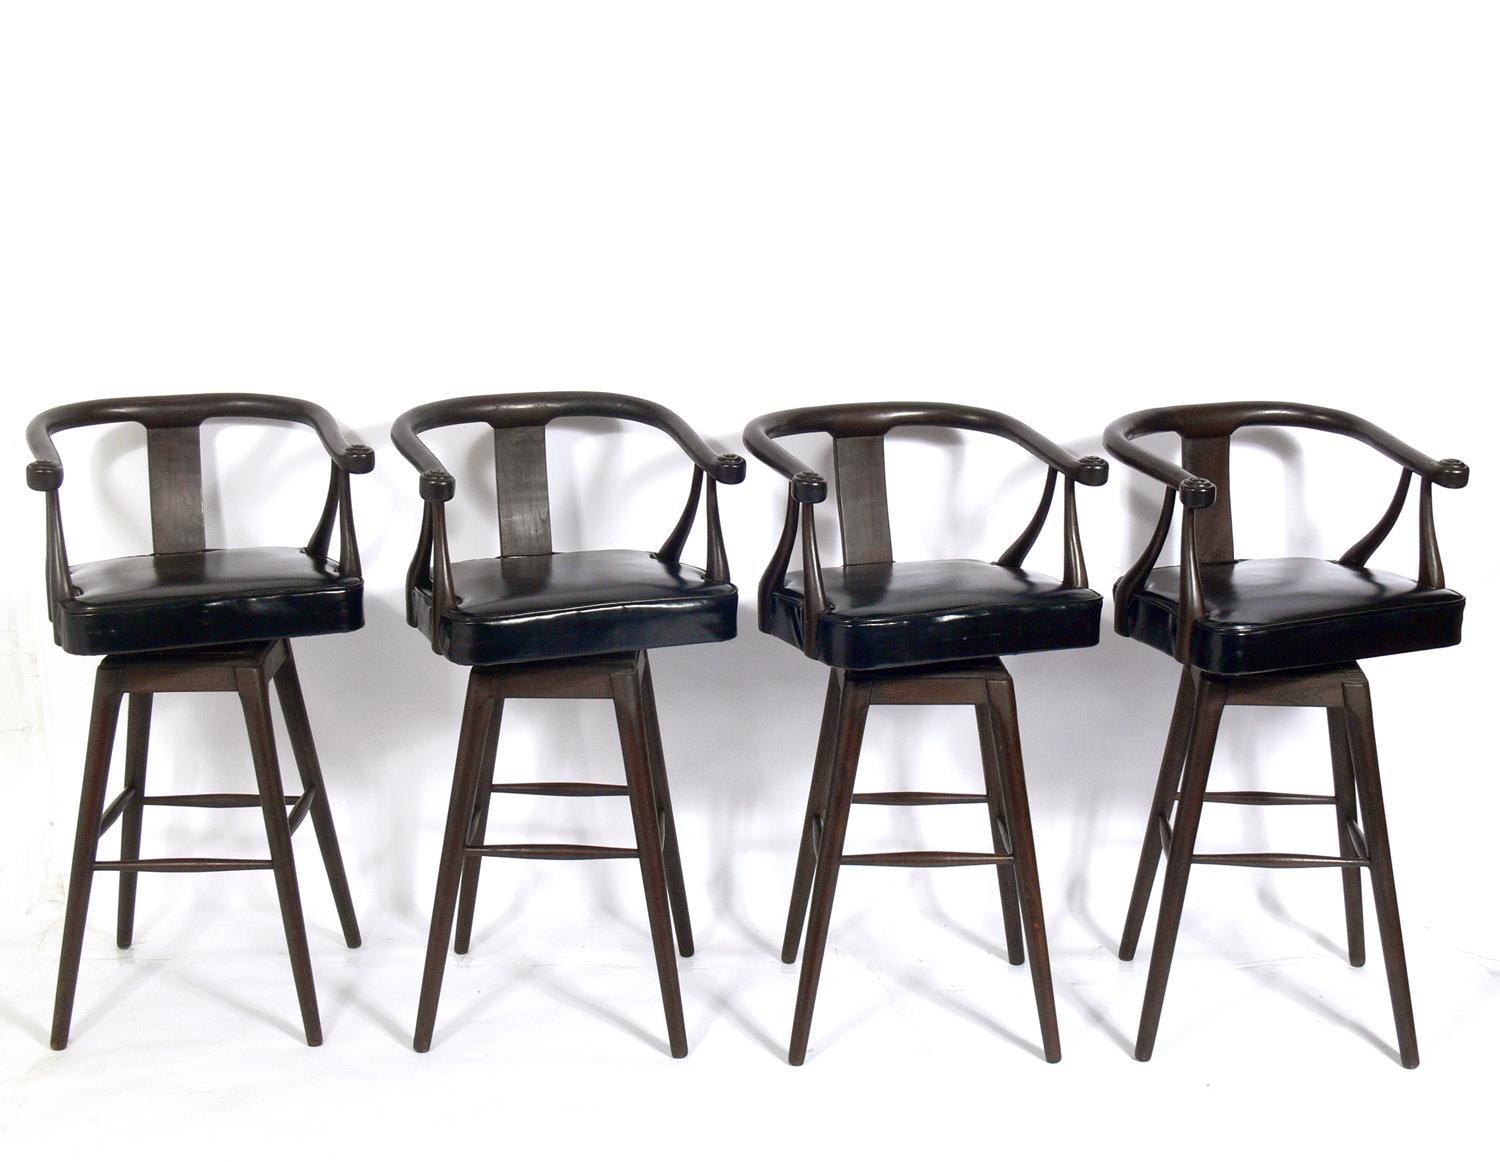 Set of four Asian style midcentury bar stools, circa 1960s. Very reminiscent of the Edward Wormley for Dunbar designed 